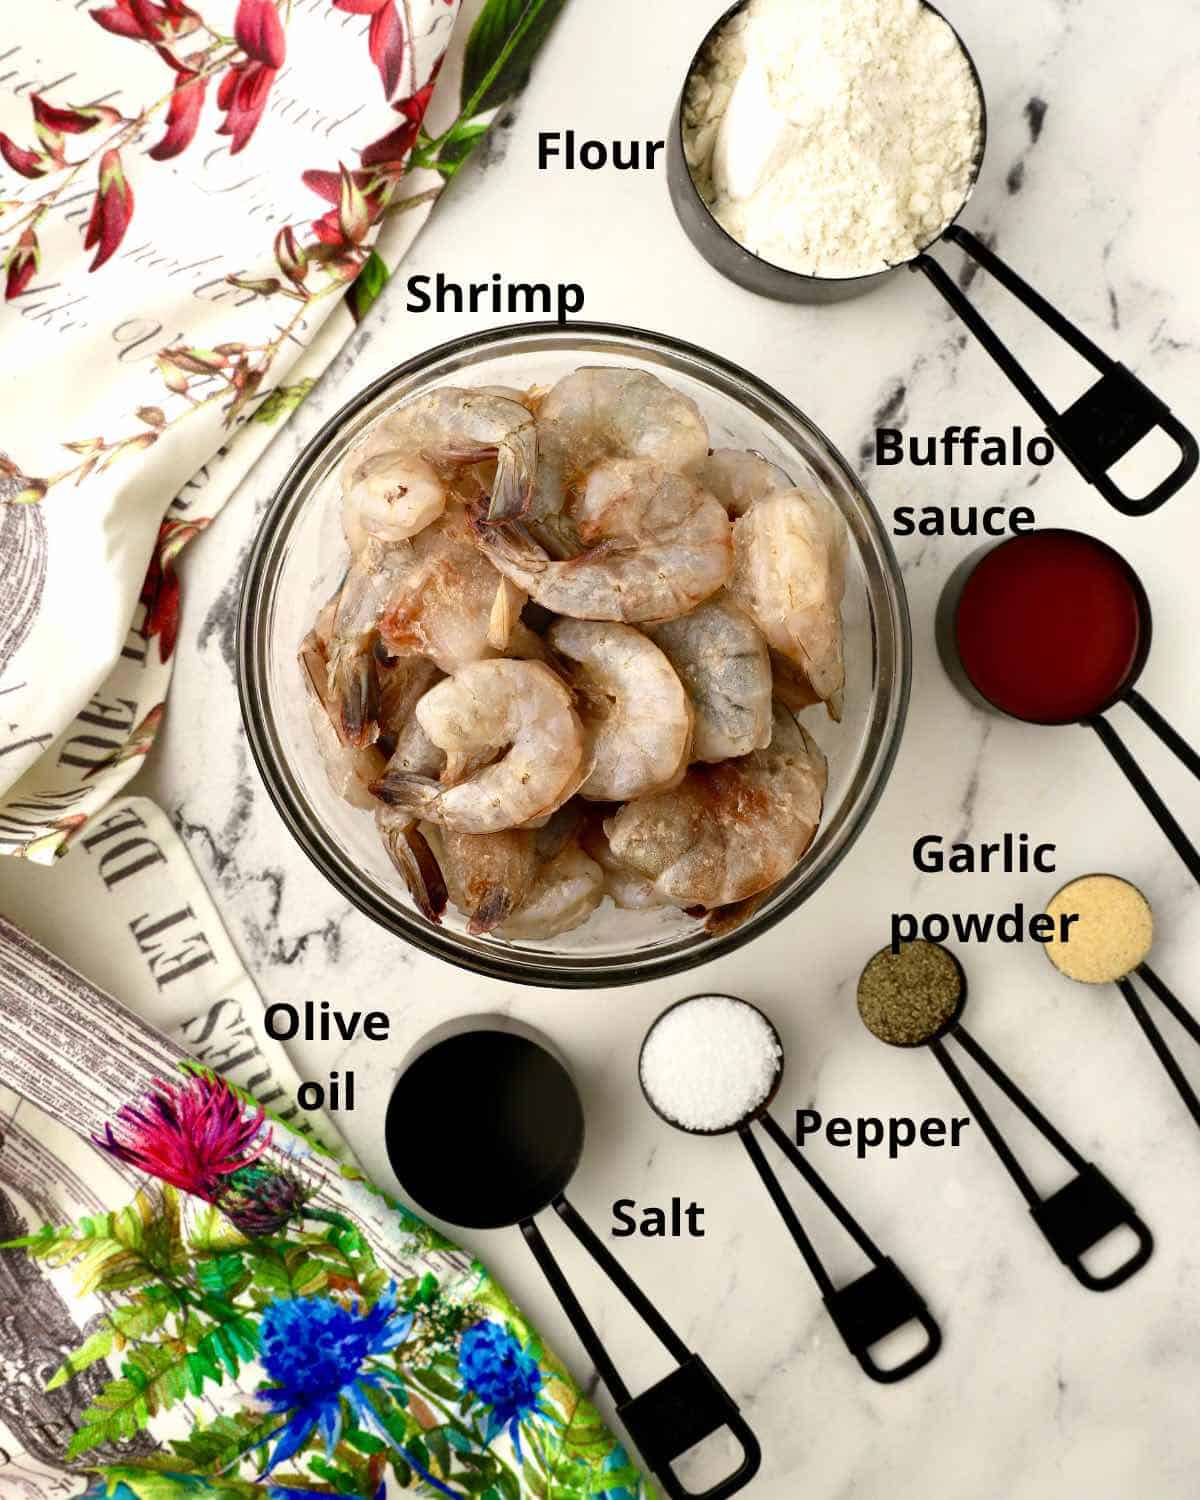 A bowl of raw shrimp and other ingredients for buffalo shrimp.